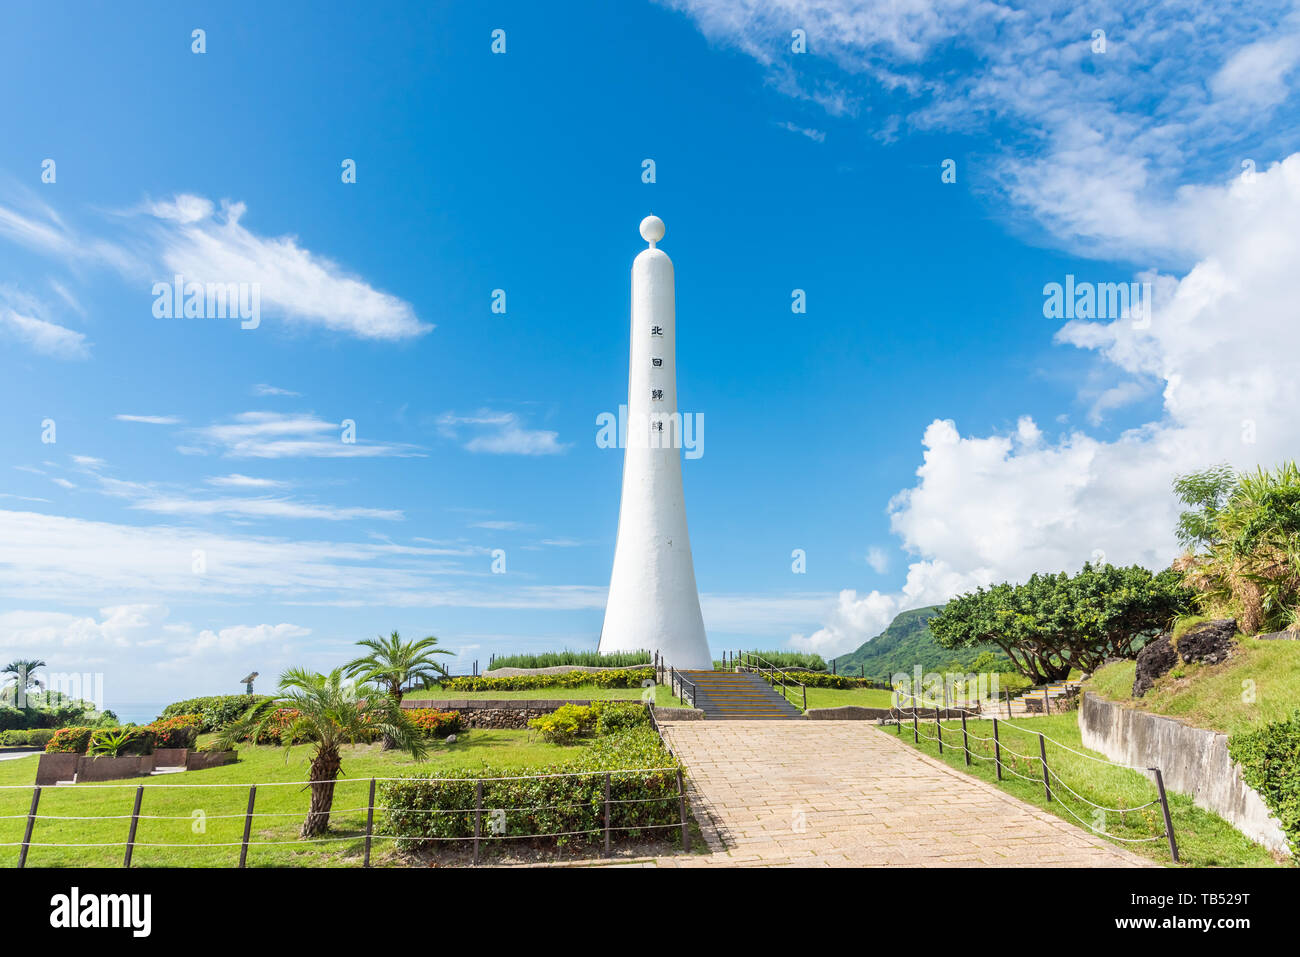 The monument of the Tropic of Cancer in East Taiwan. Stock Photo